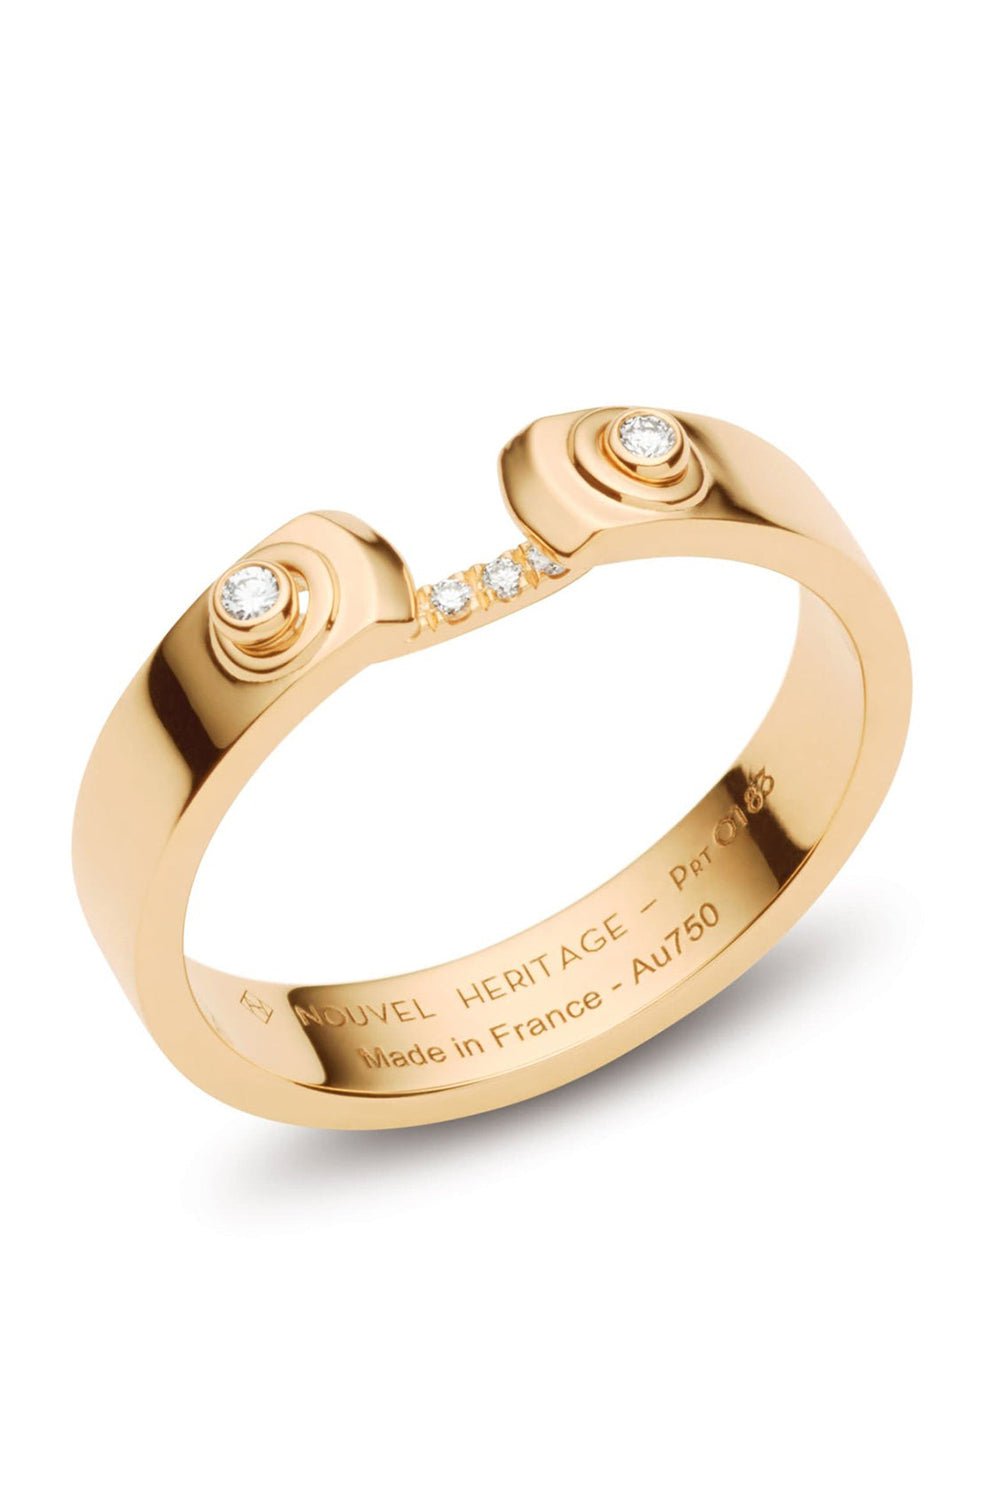 NOUVEL HERITAGE-Business Meeting Mood Ring-YELLOW GOLD